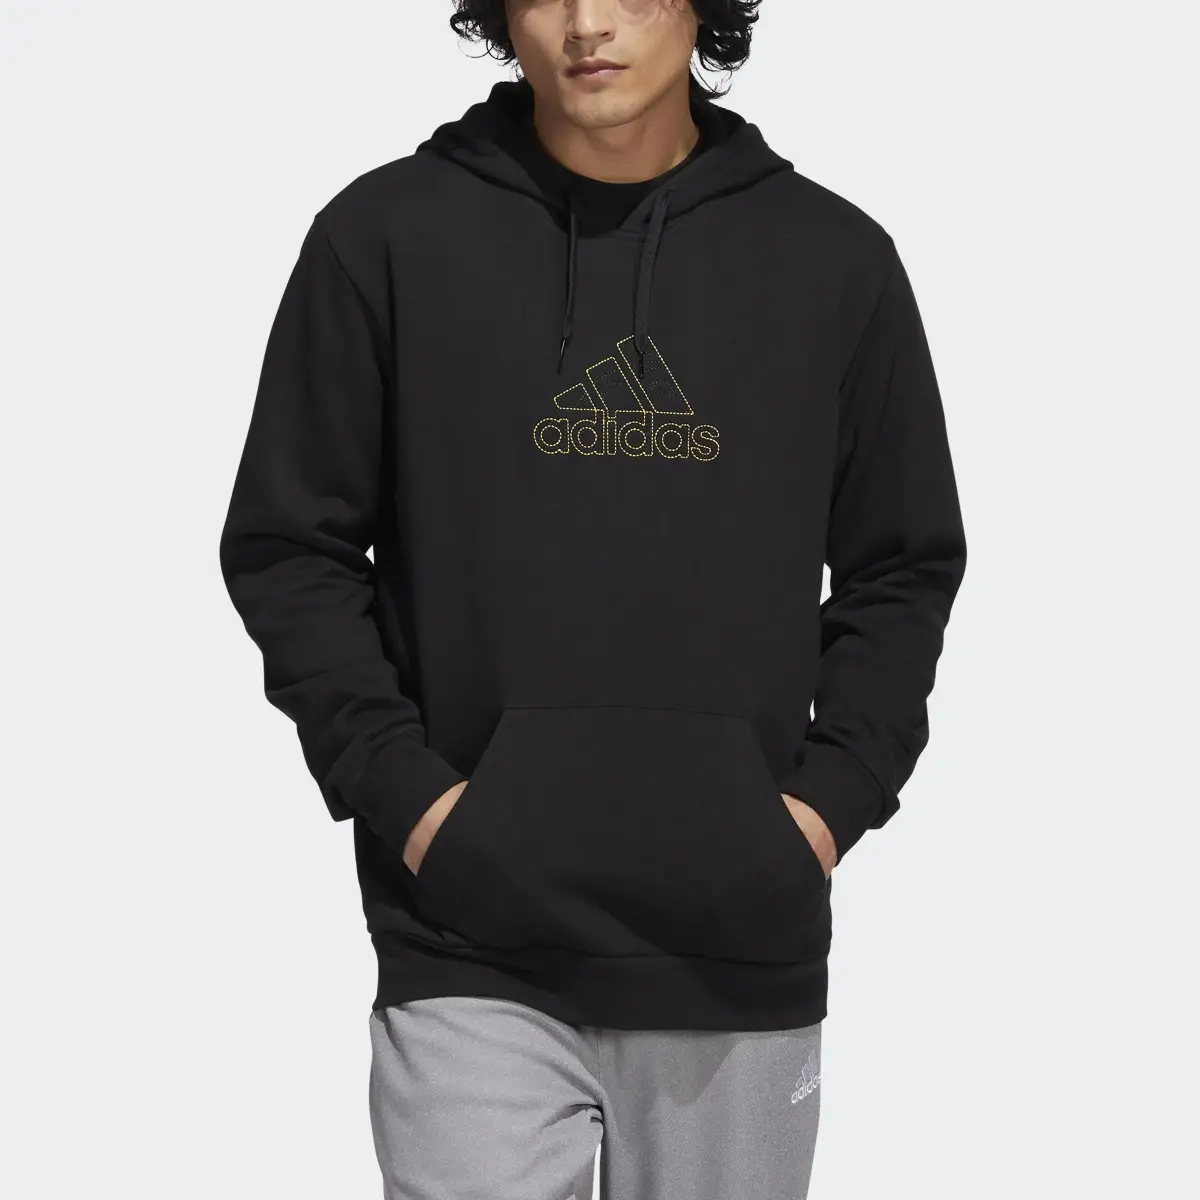 Adidas Embroidery Graphic Hoodie. 1